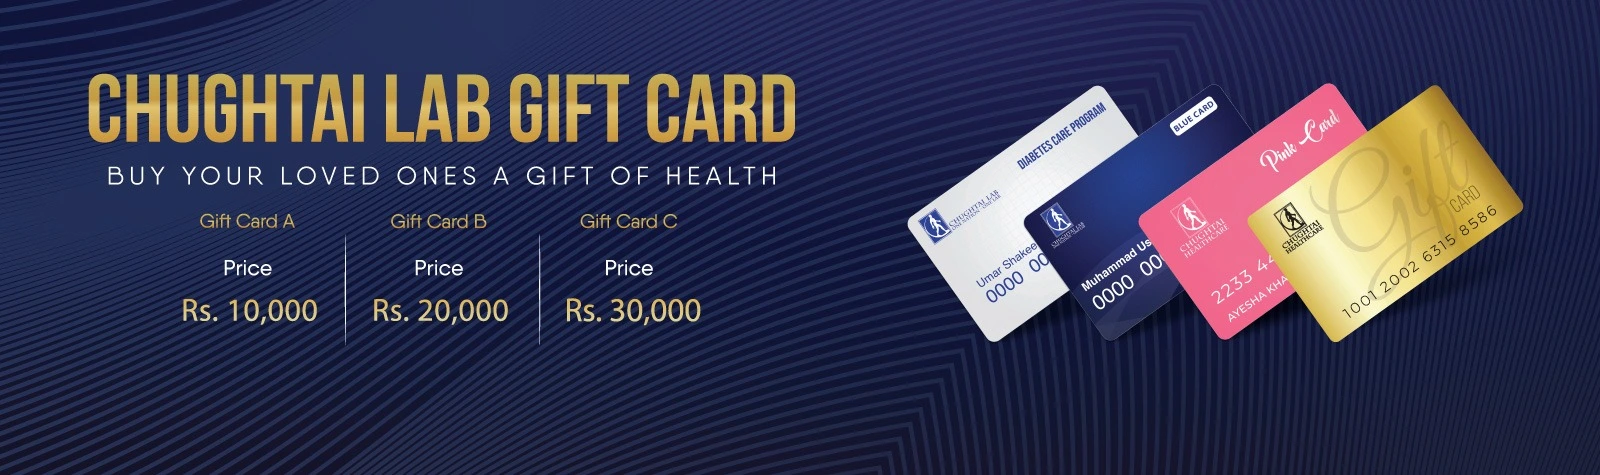 Gift Card - Buy your Loved Ones A Gift of Health